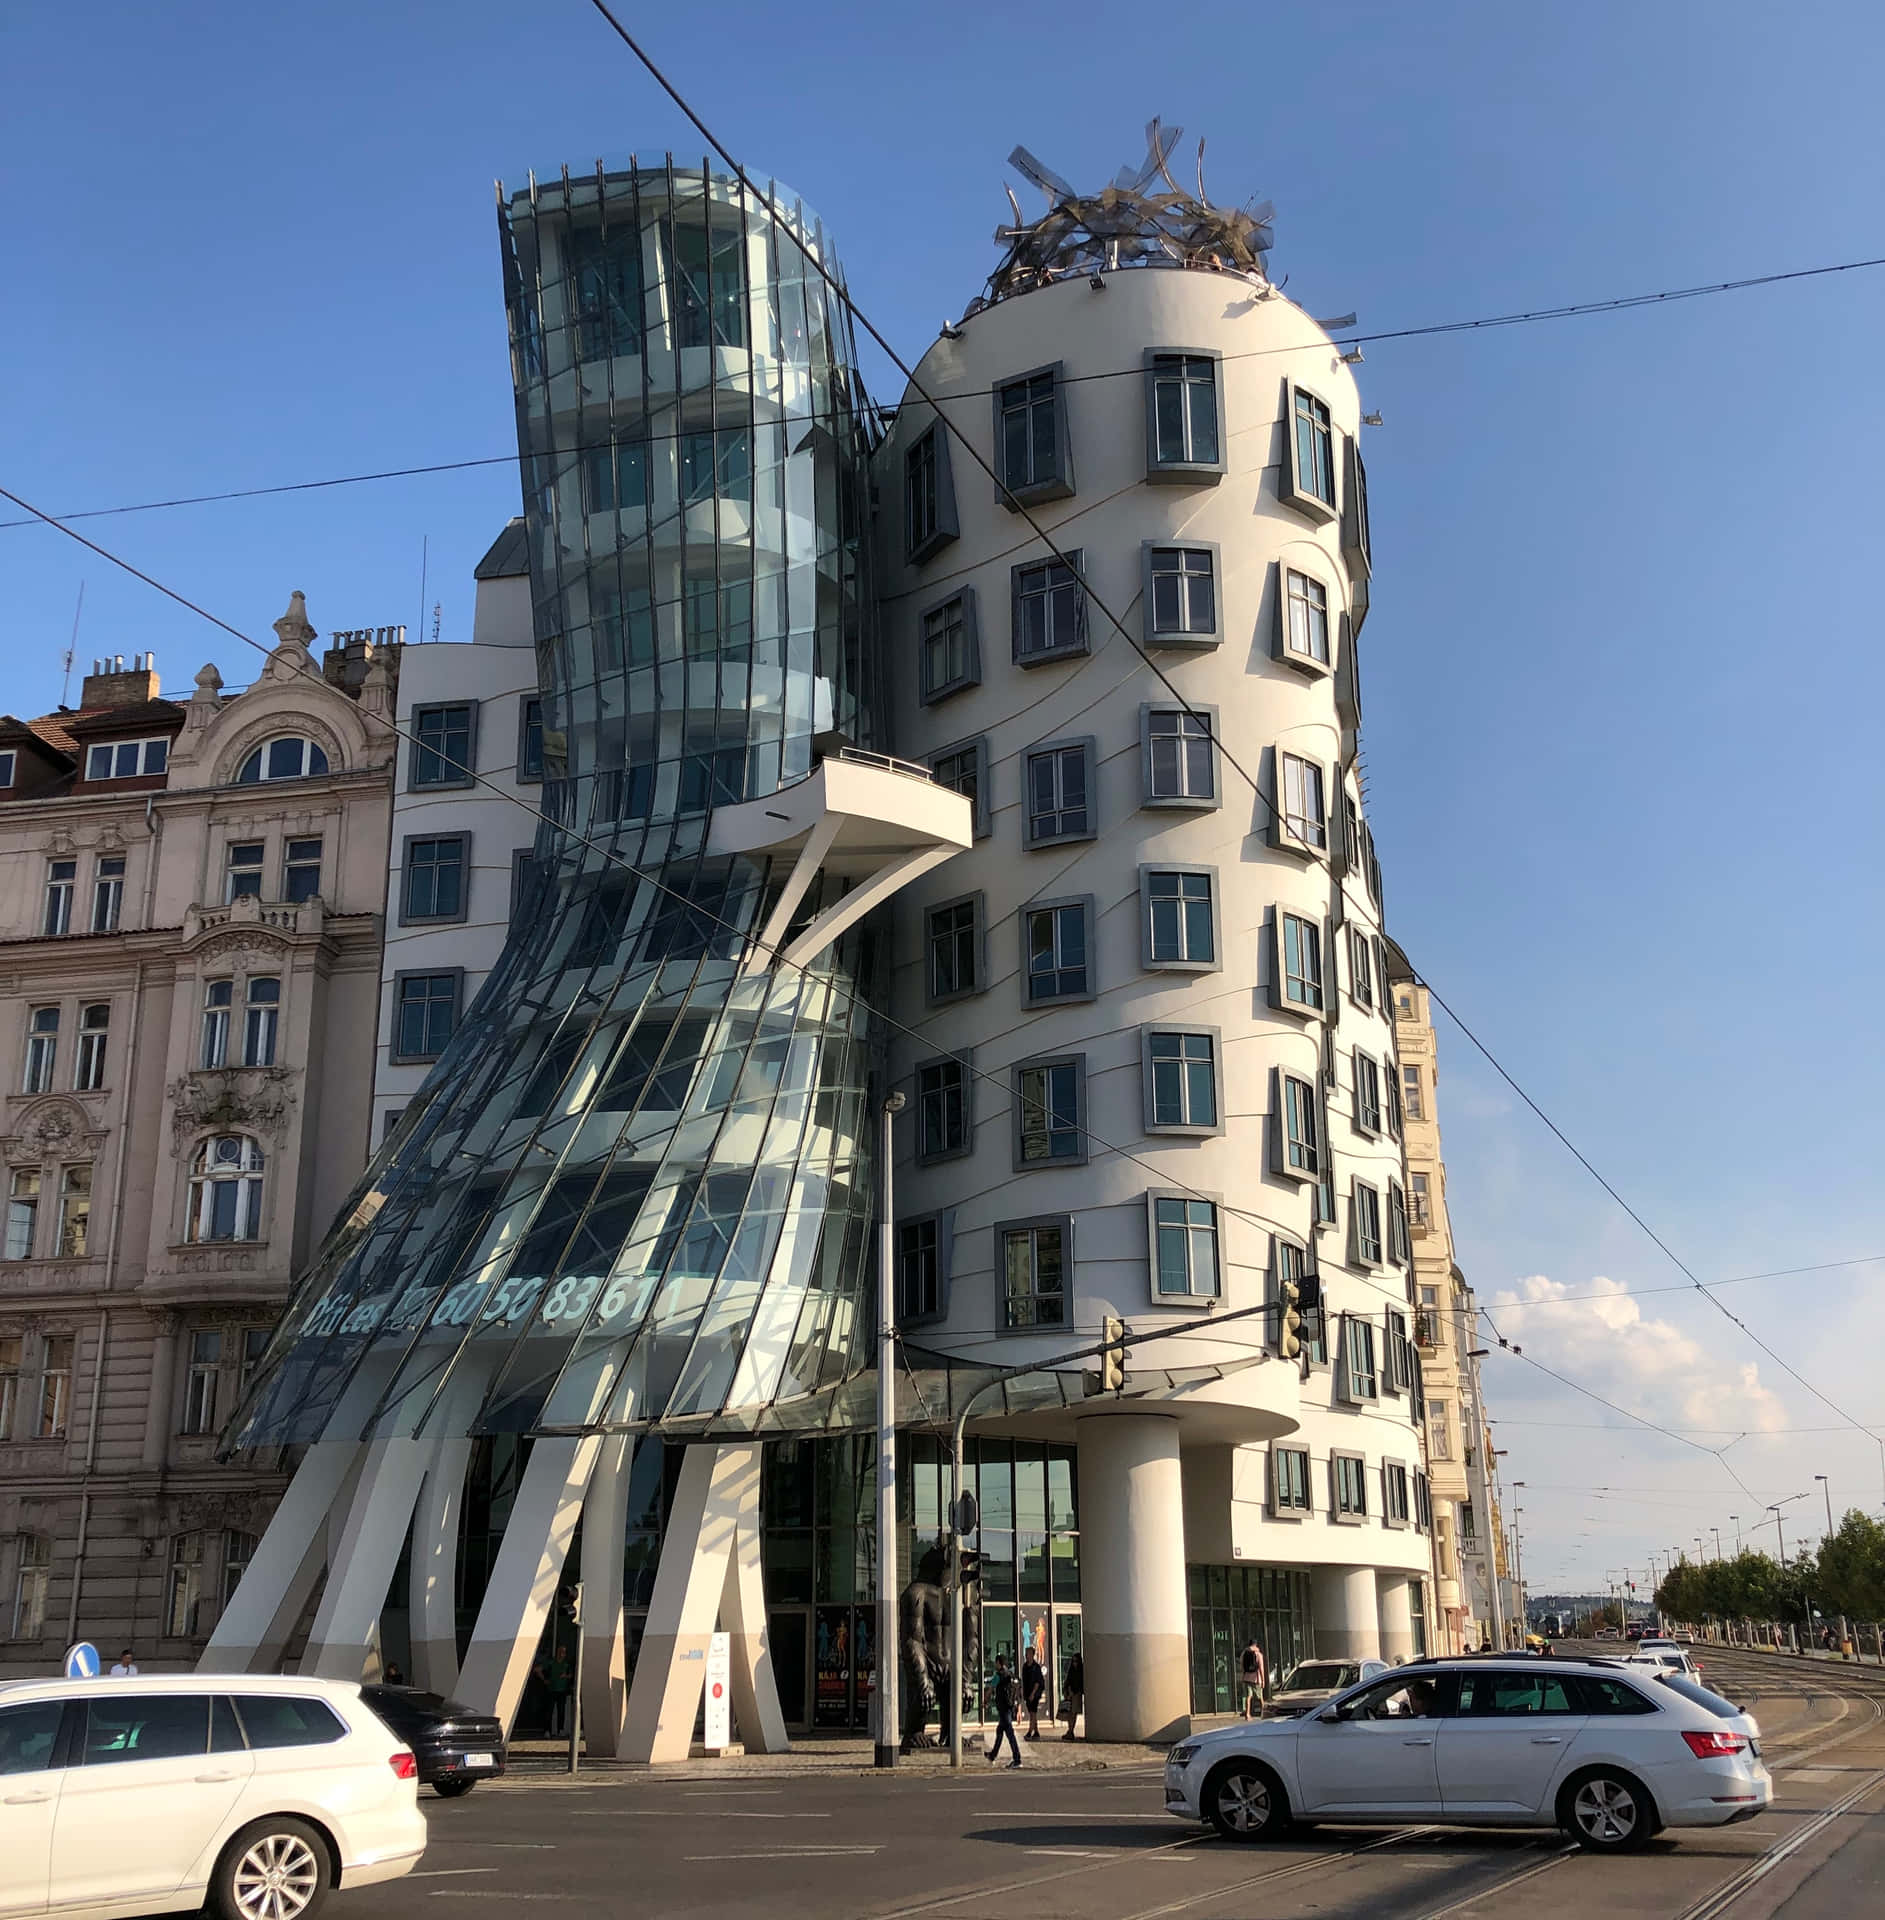 Dancing House In The Daytime Wallpaper